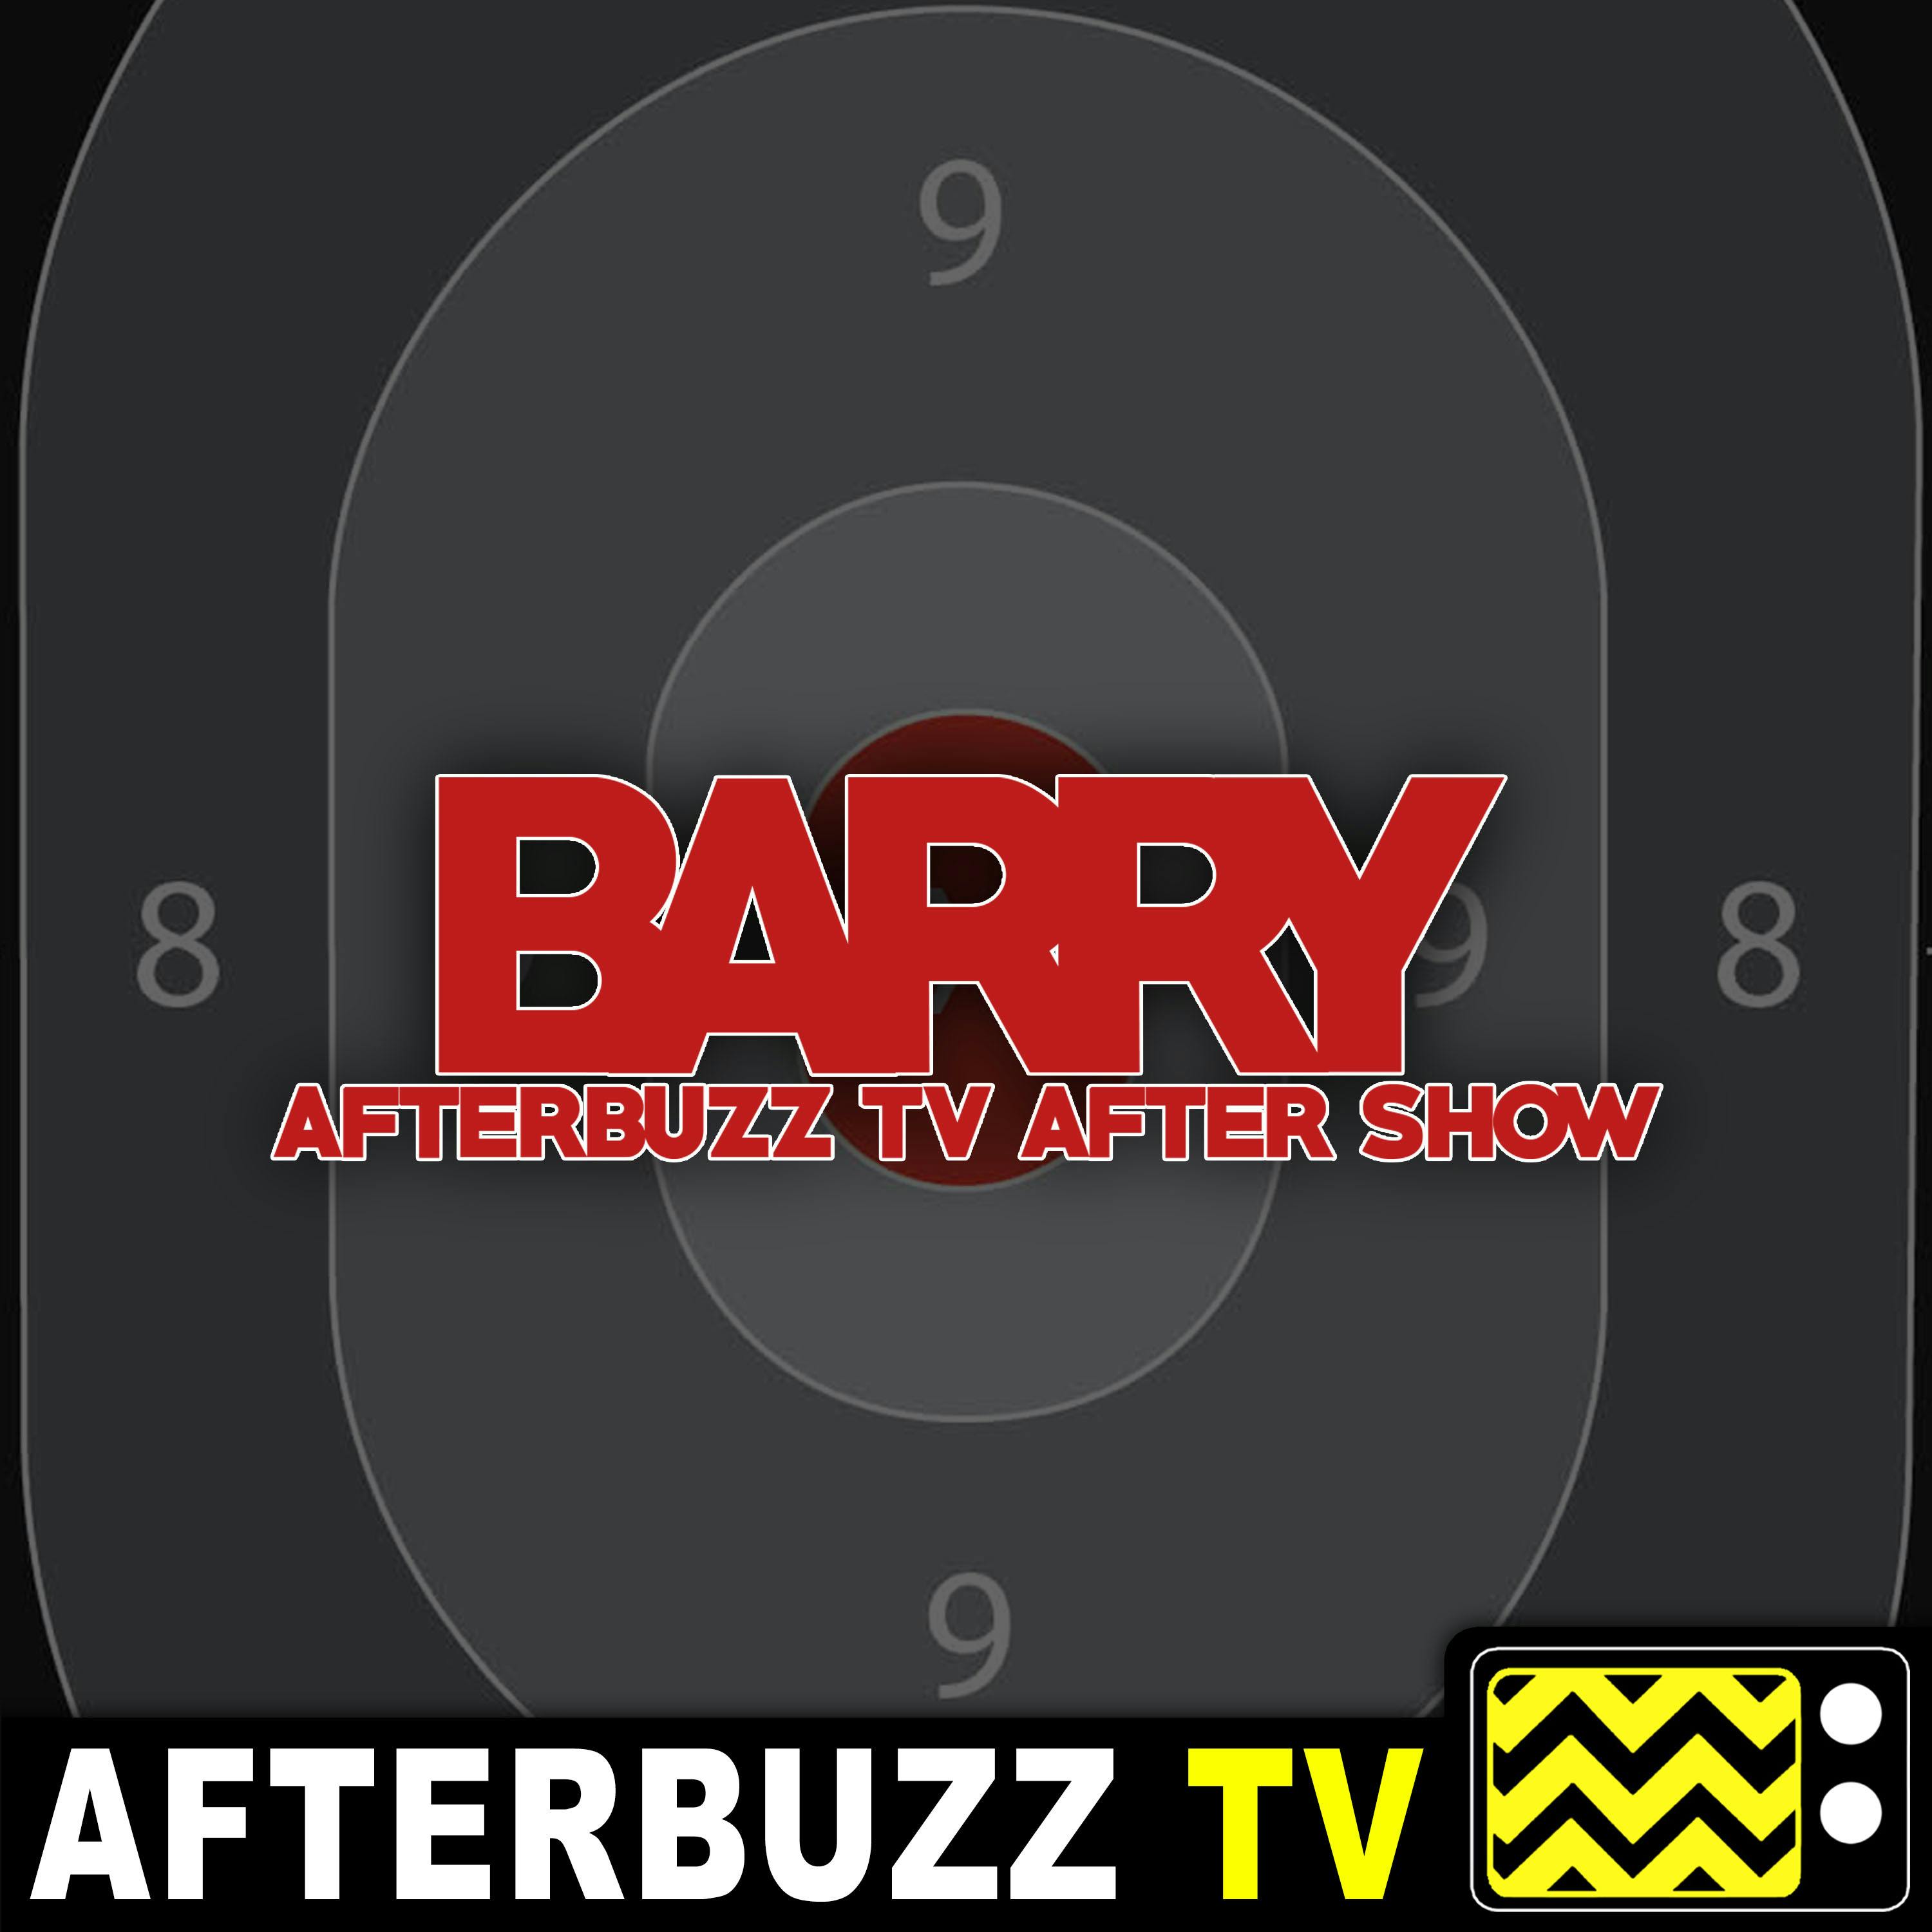 "Past = Present x Future Over Yesterday" Season 2 Episode 3 ' Barry' Review